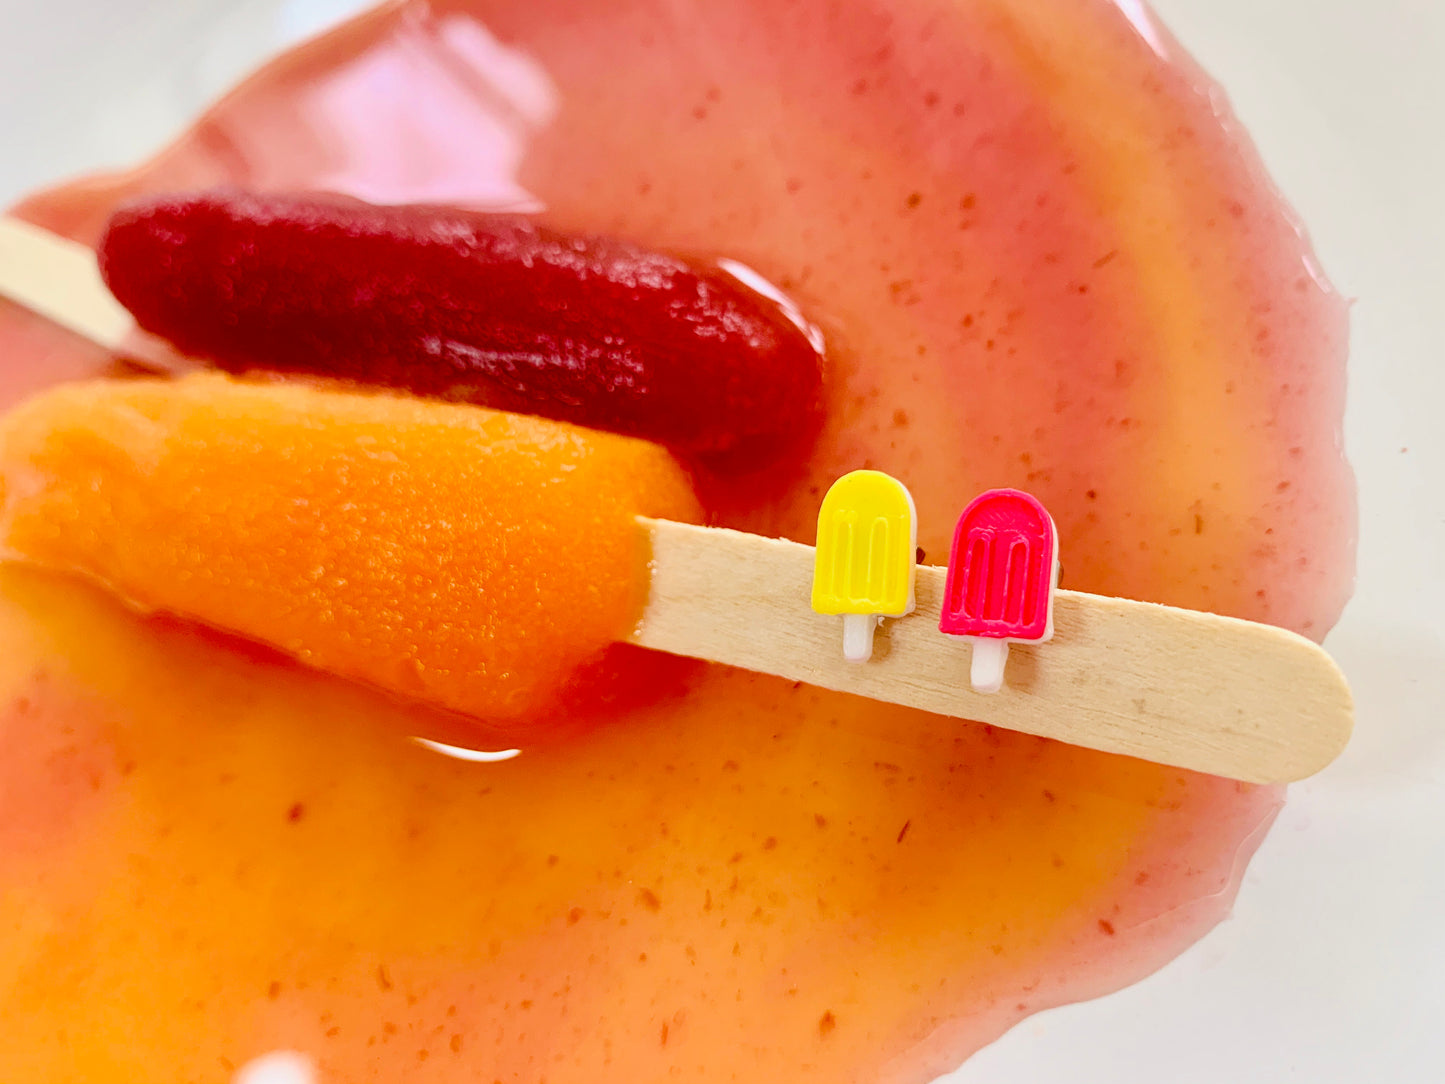 There are two mostly melted popsicles in a pool of juice. One is a rich dark red, the other is a bright  orange. On the wooden popsicle stick are two small  3D printed earrings from R+D. They are mismatching, but complementary colors. One is yellow, the other is bright pink. Both have white sticks. 